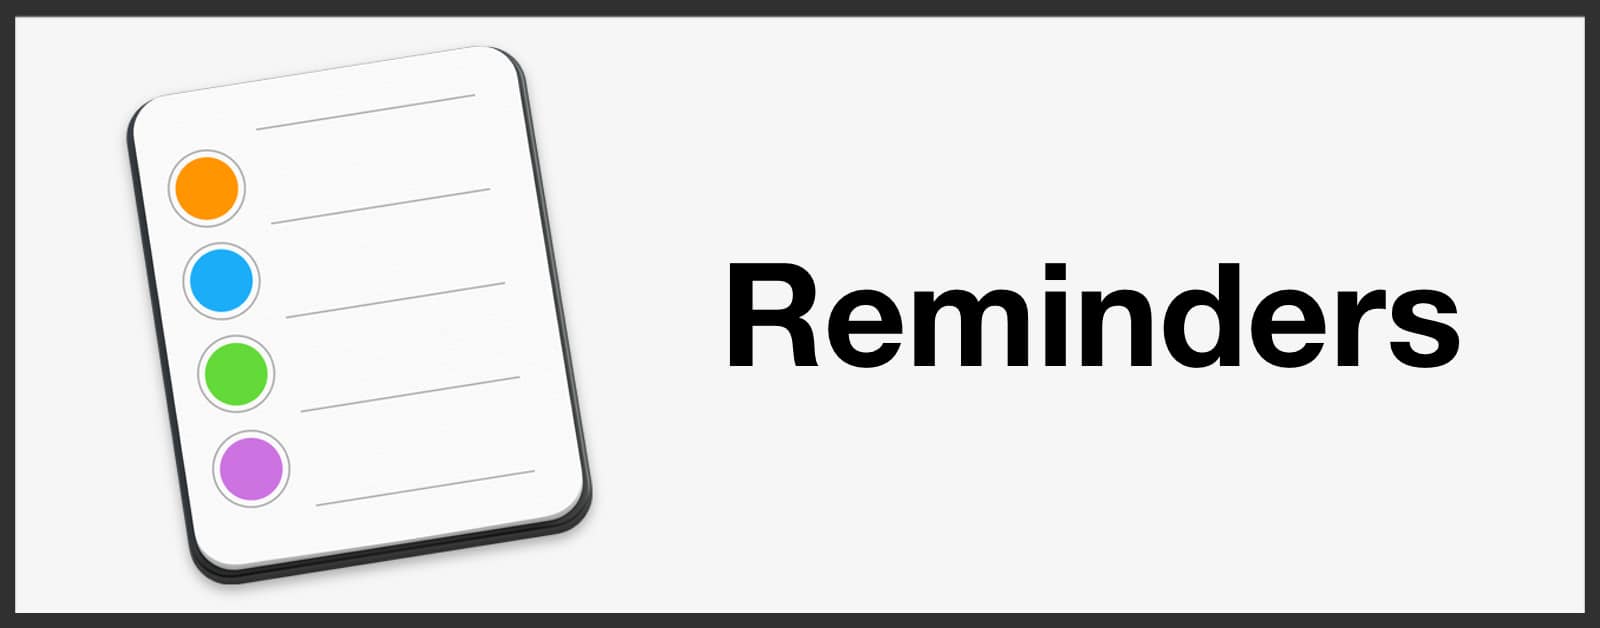 macOS: Automatically Format Reminders With Date And Time - The Mac Observer